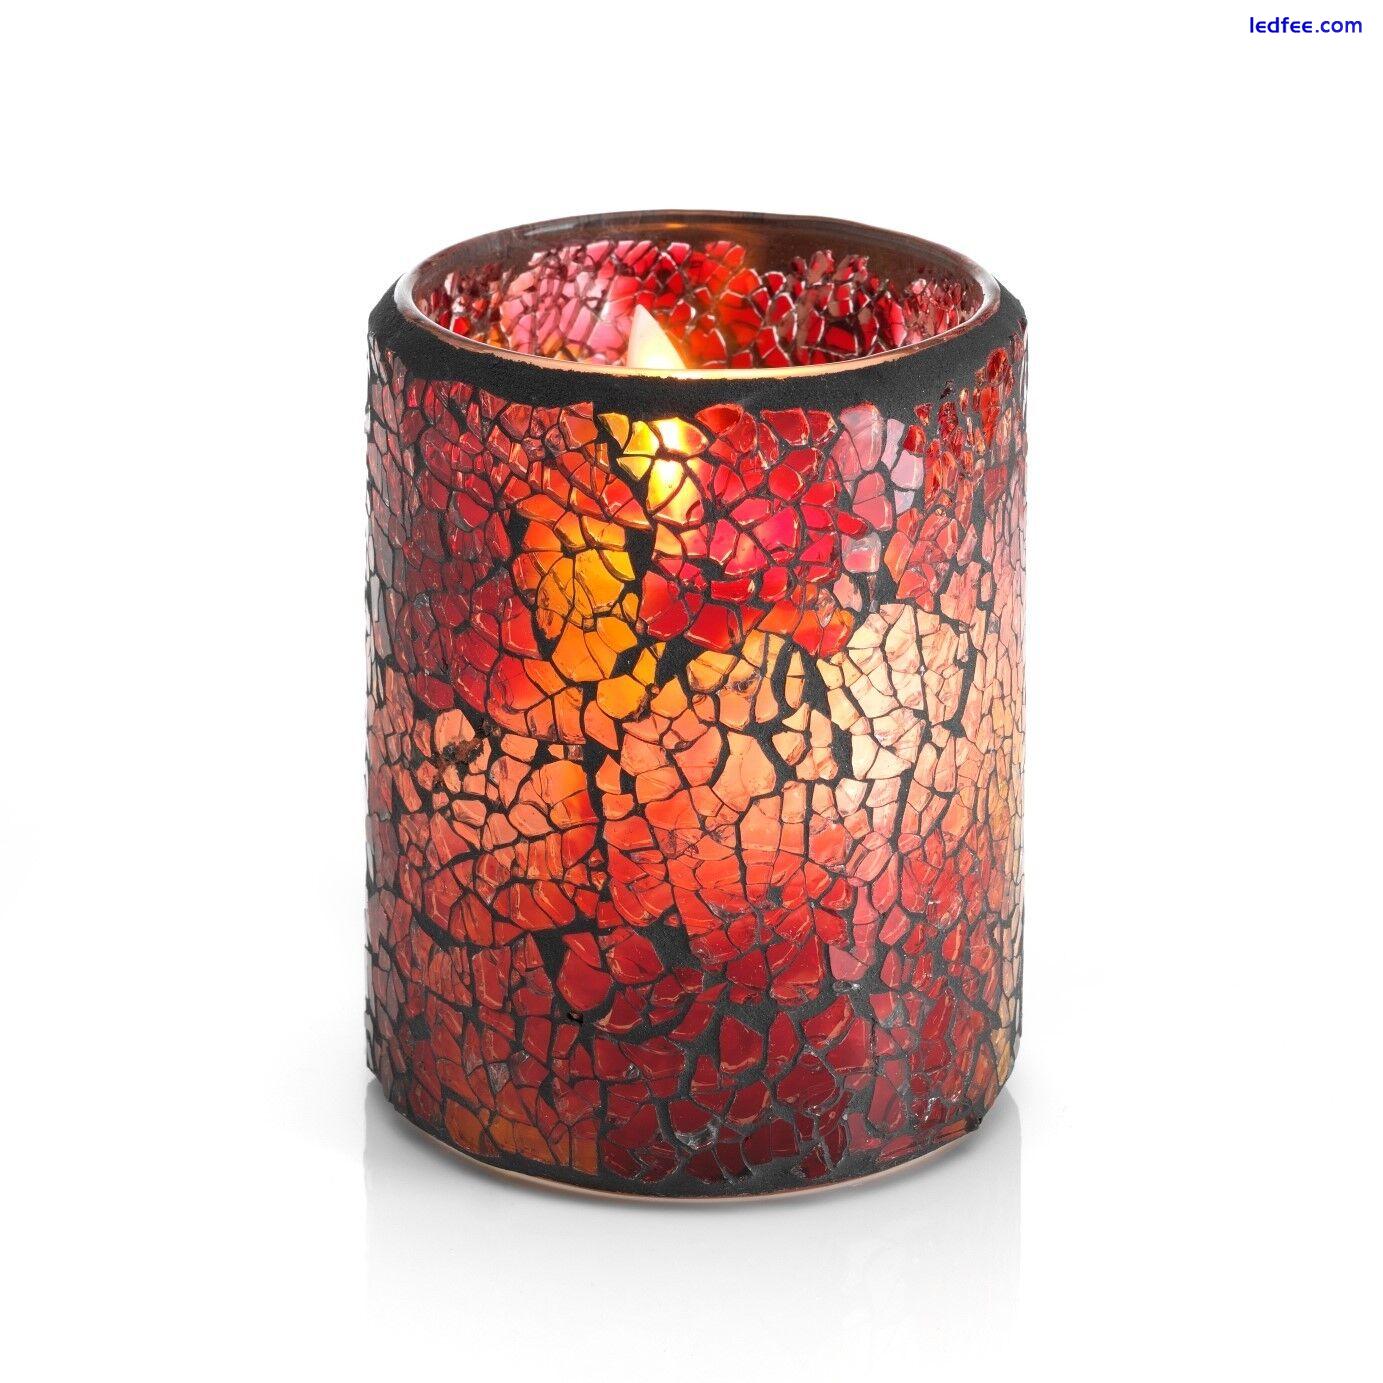 Auraglow Mosaic Glass Flickering Flameless LED Decorative Candle Safety Flame 2 